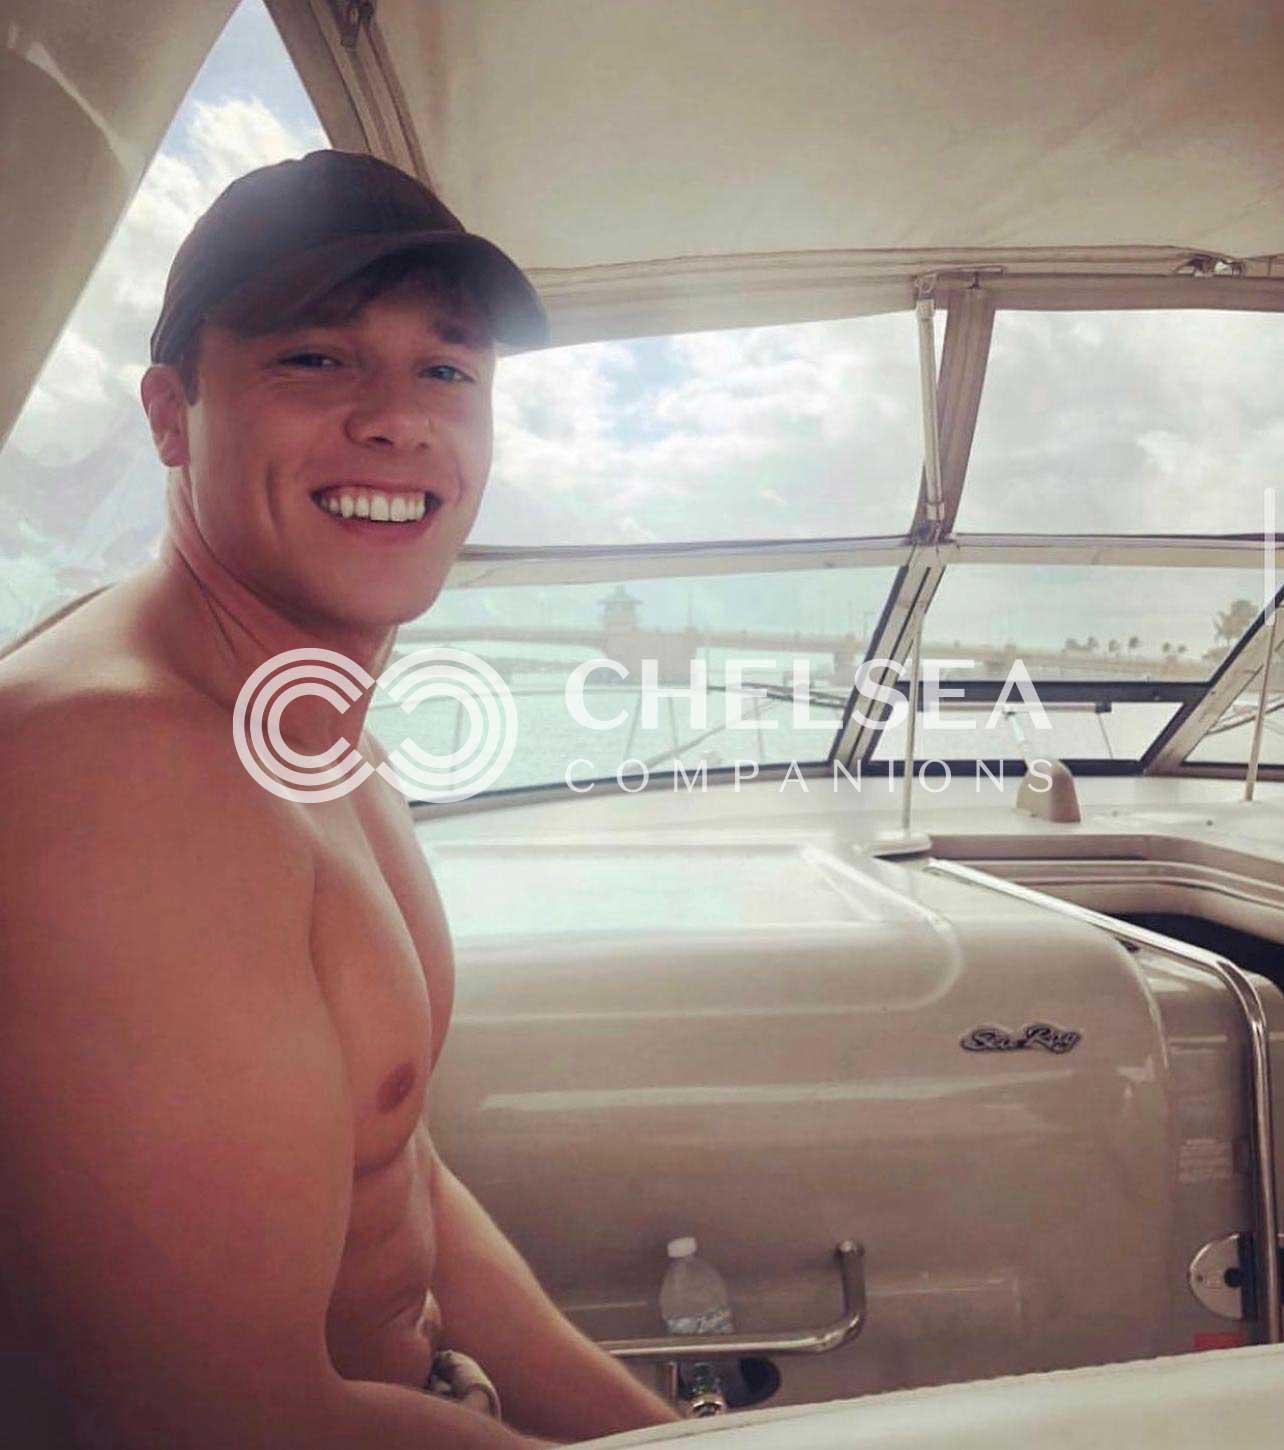 Joshua topless on a boat